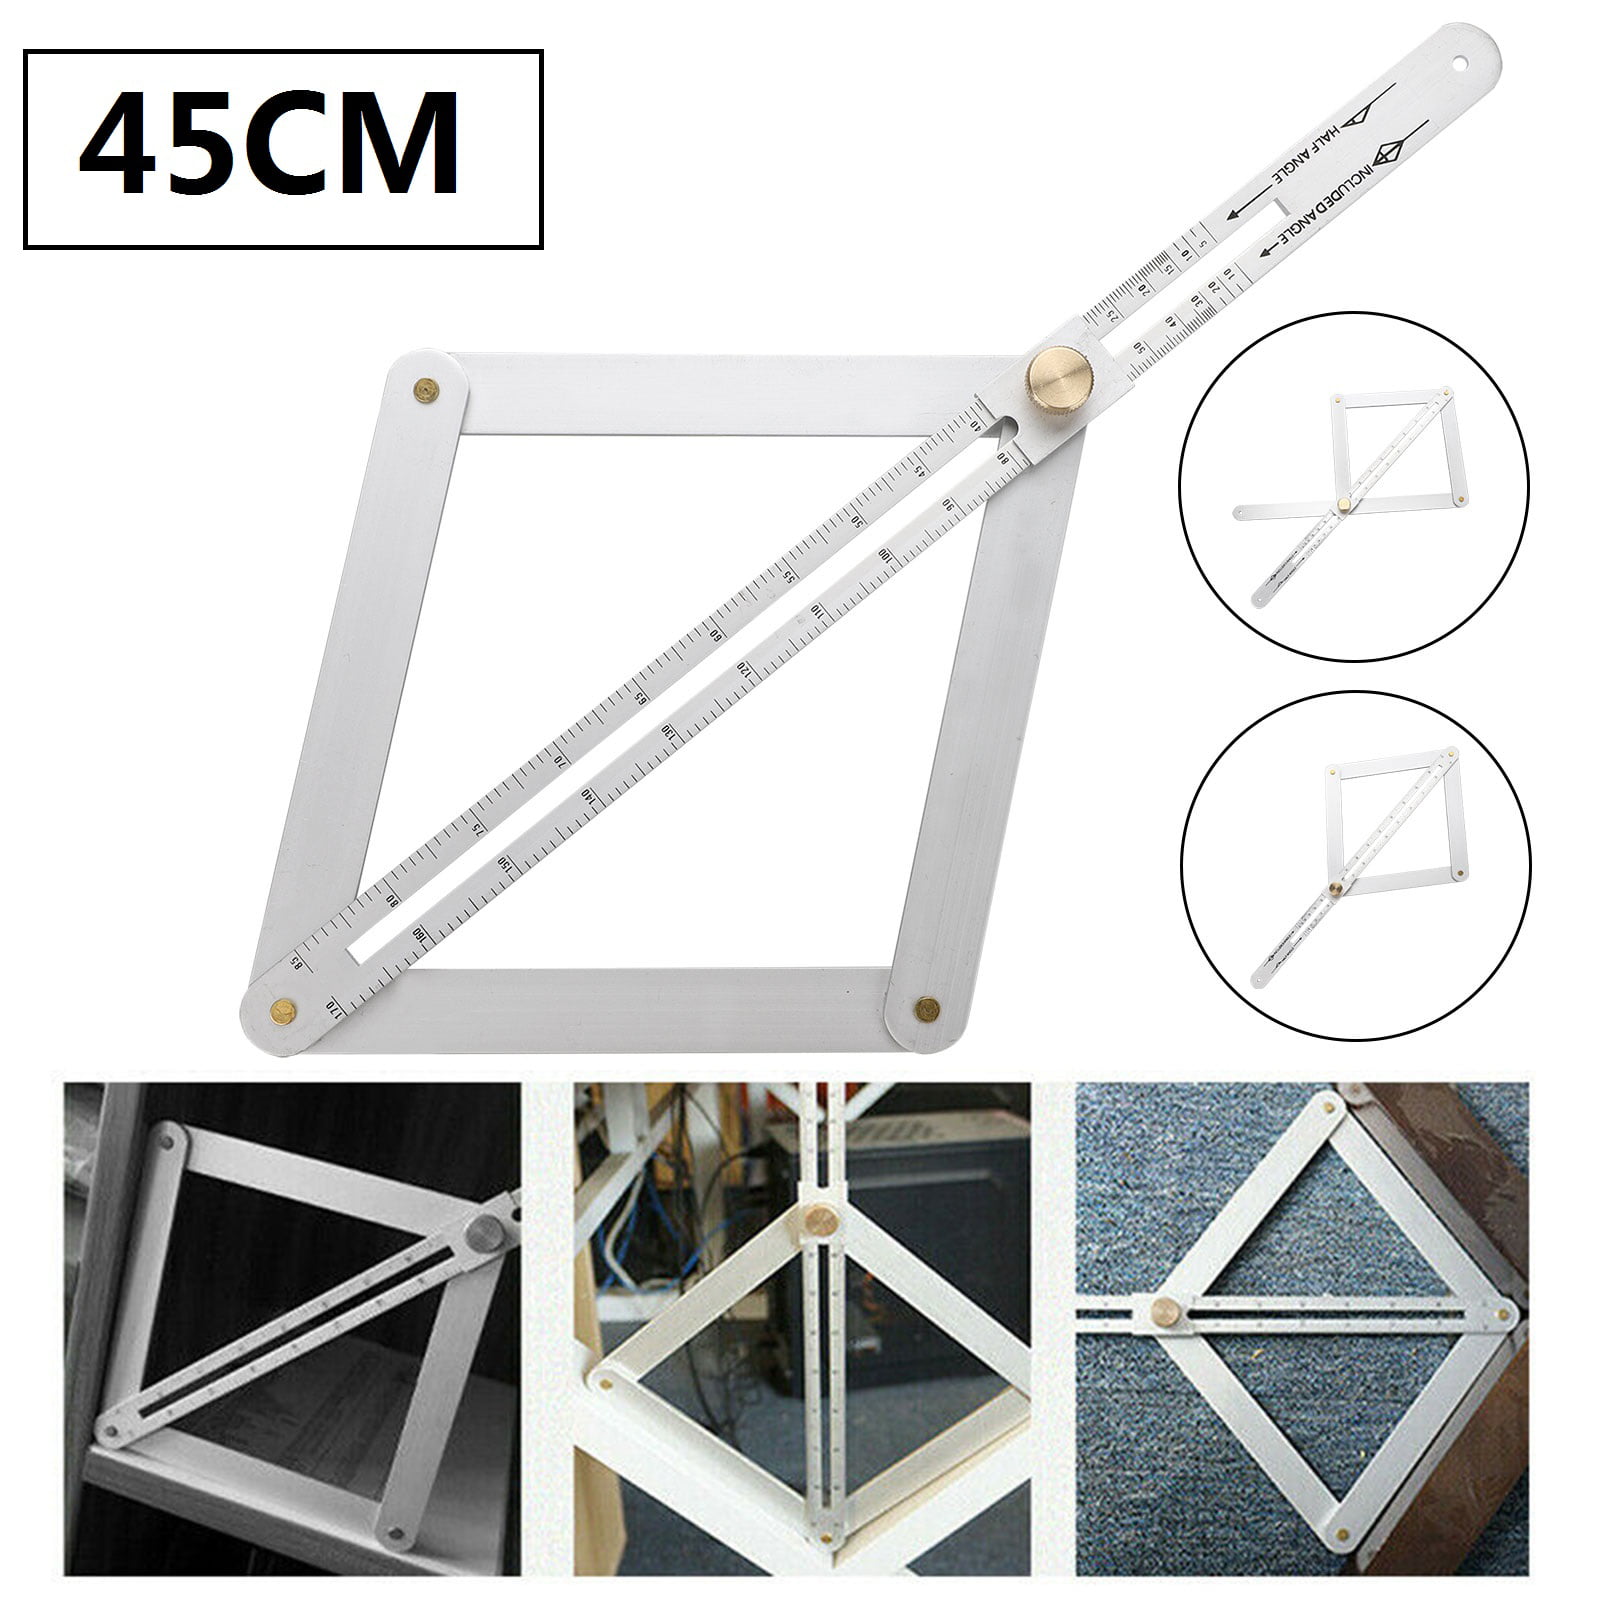 UK Stainless Steel Corner Angle Finder Ceiling Artifact Tool Square Protractor. 